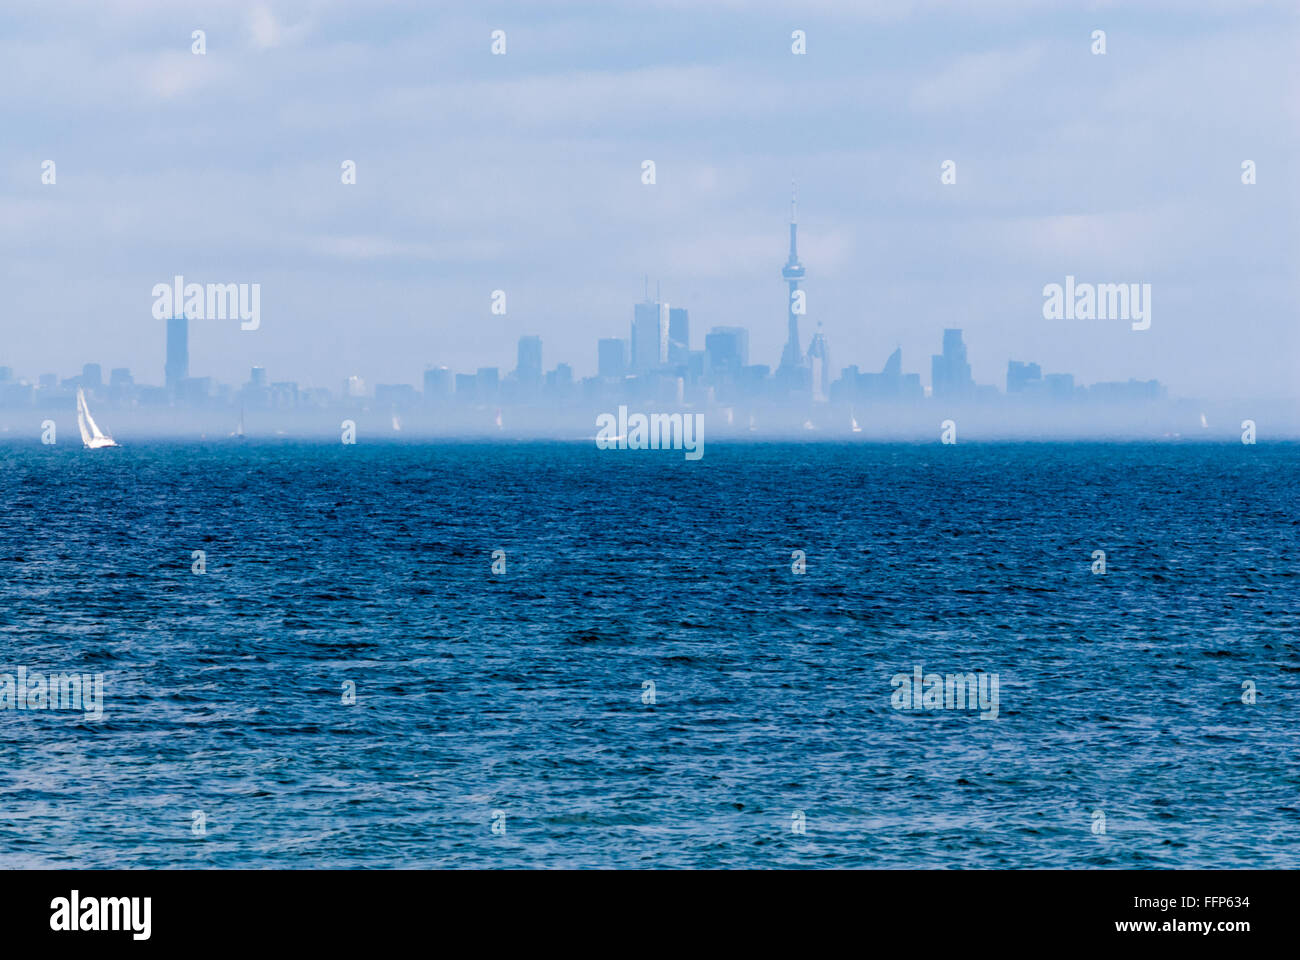 Toronto city skyline from across wavy blue rippled water with sailboat and other boats in distance in hazy fog. Stock Photo